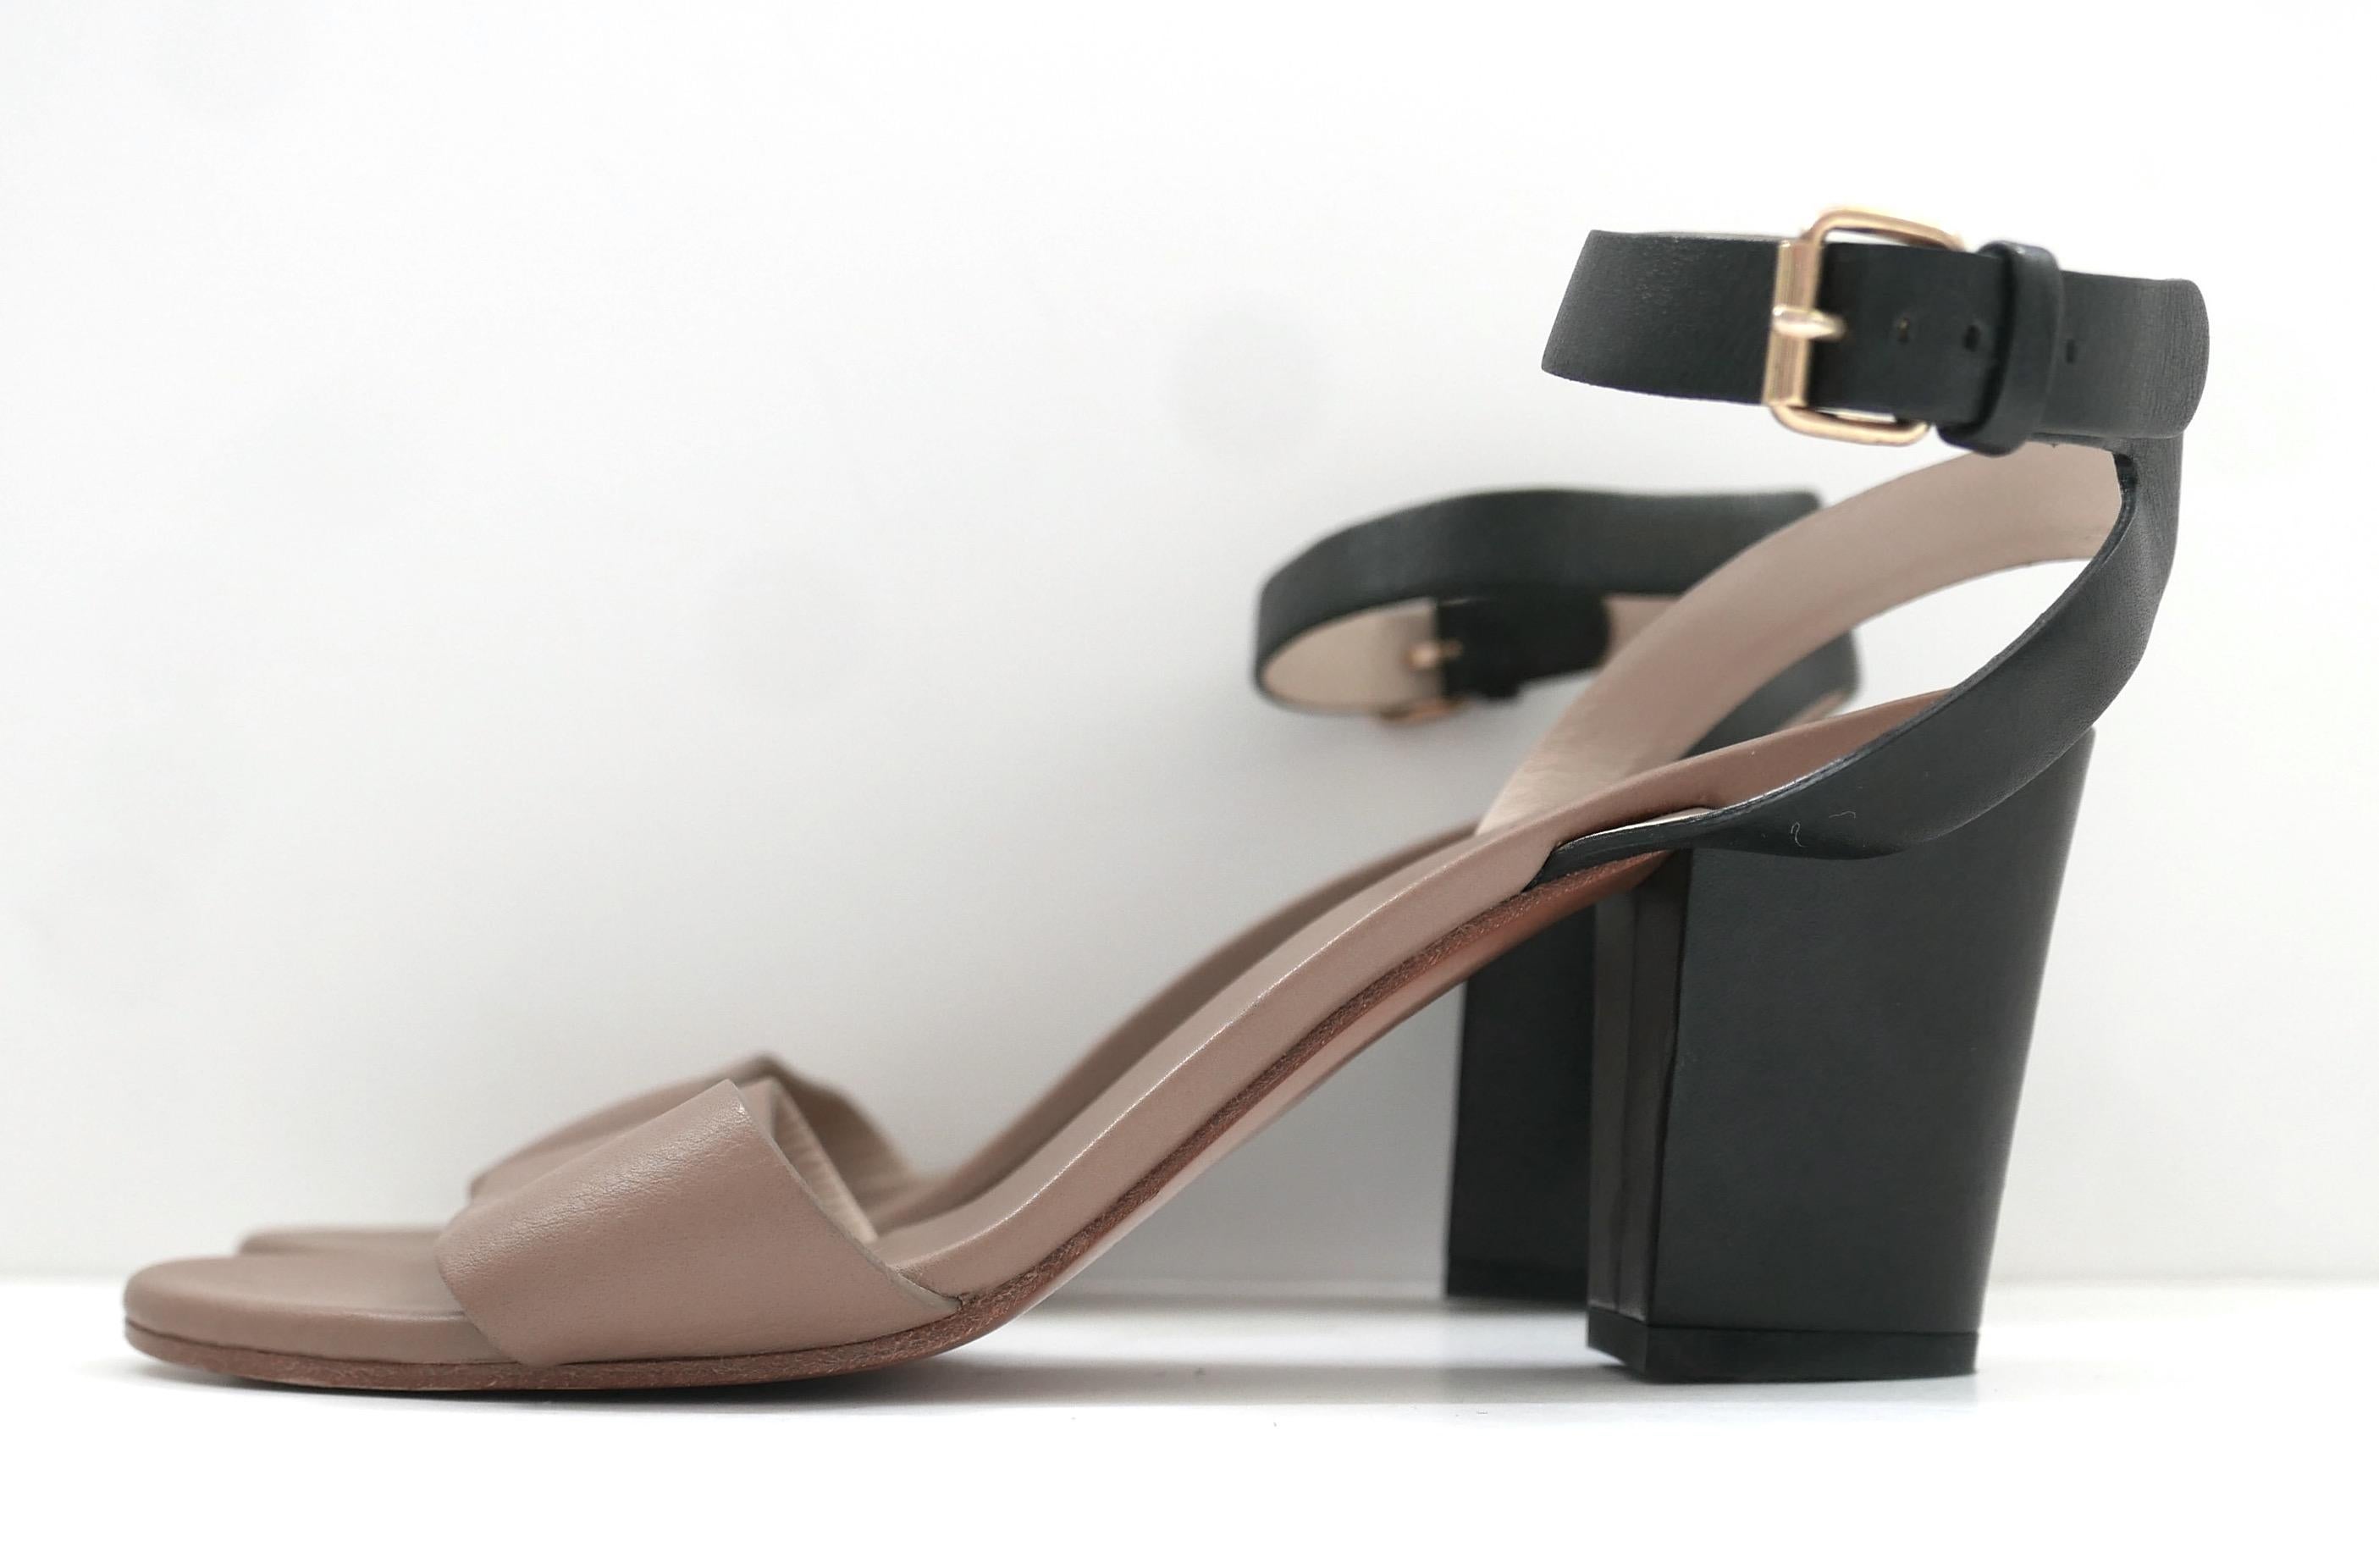 Super chic Chloe two tone block heel sandals. Worn once. Made from thick taupe and black leather, they have brass ankle buckles and tapered chunky heels. Size 39. Measures approx - 10” heel to toe, heel 3”.
